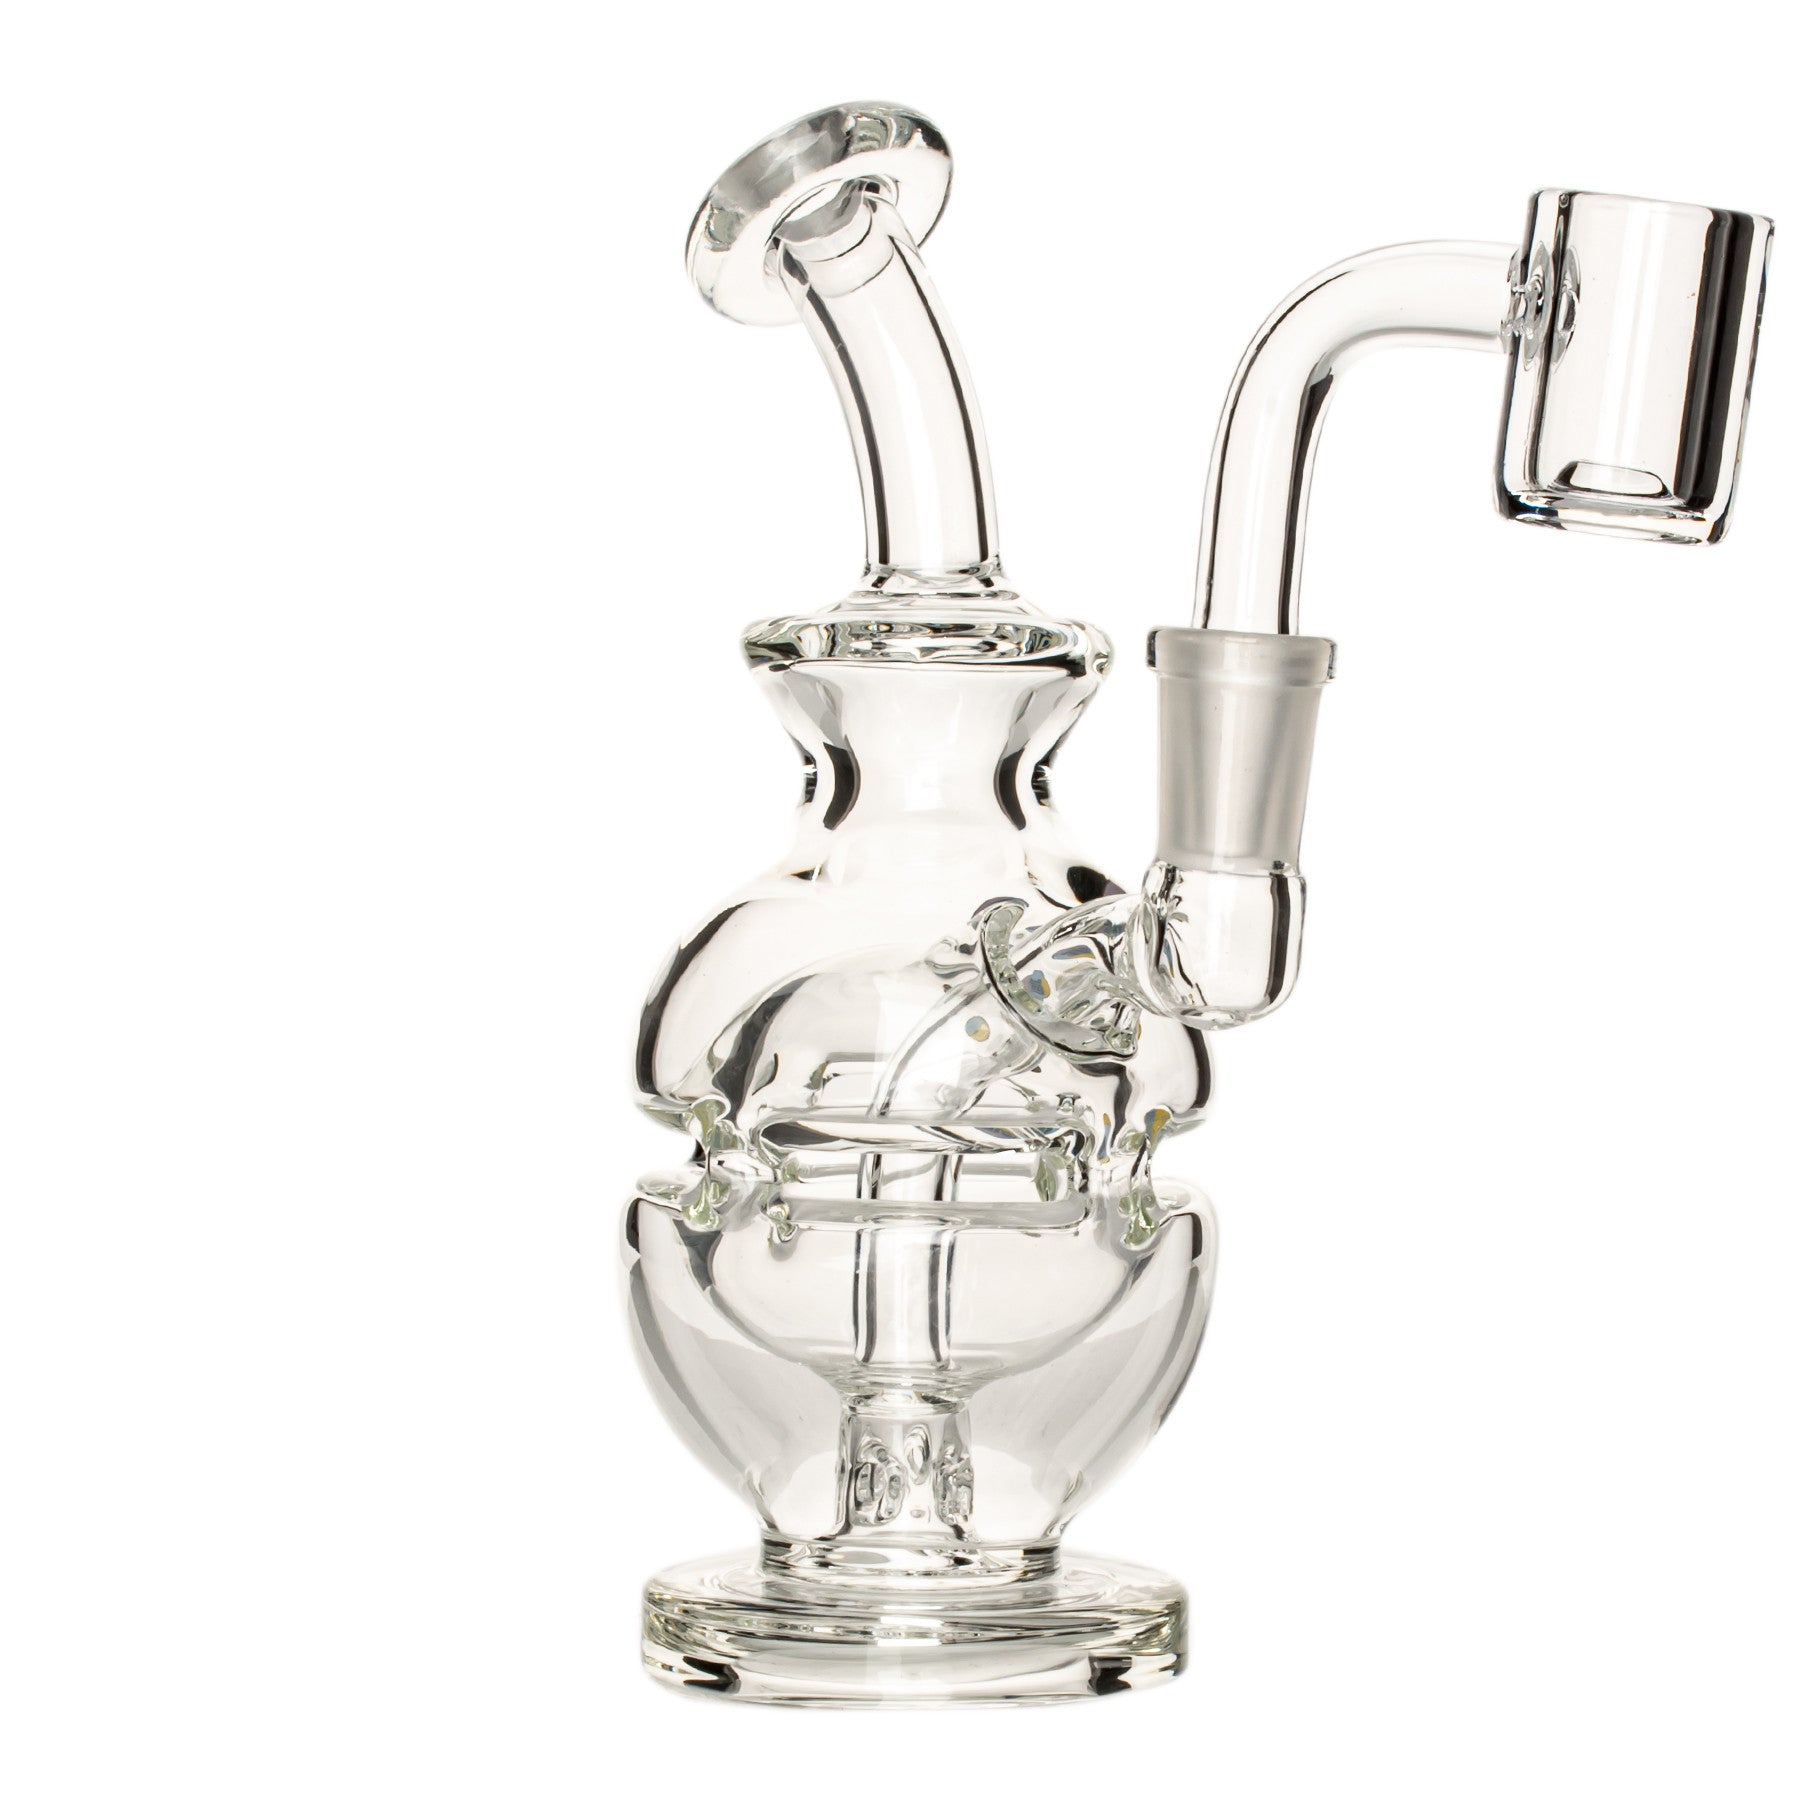 5" Ace Mini Concentrate Rig